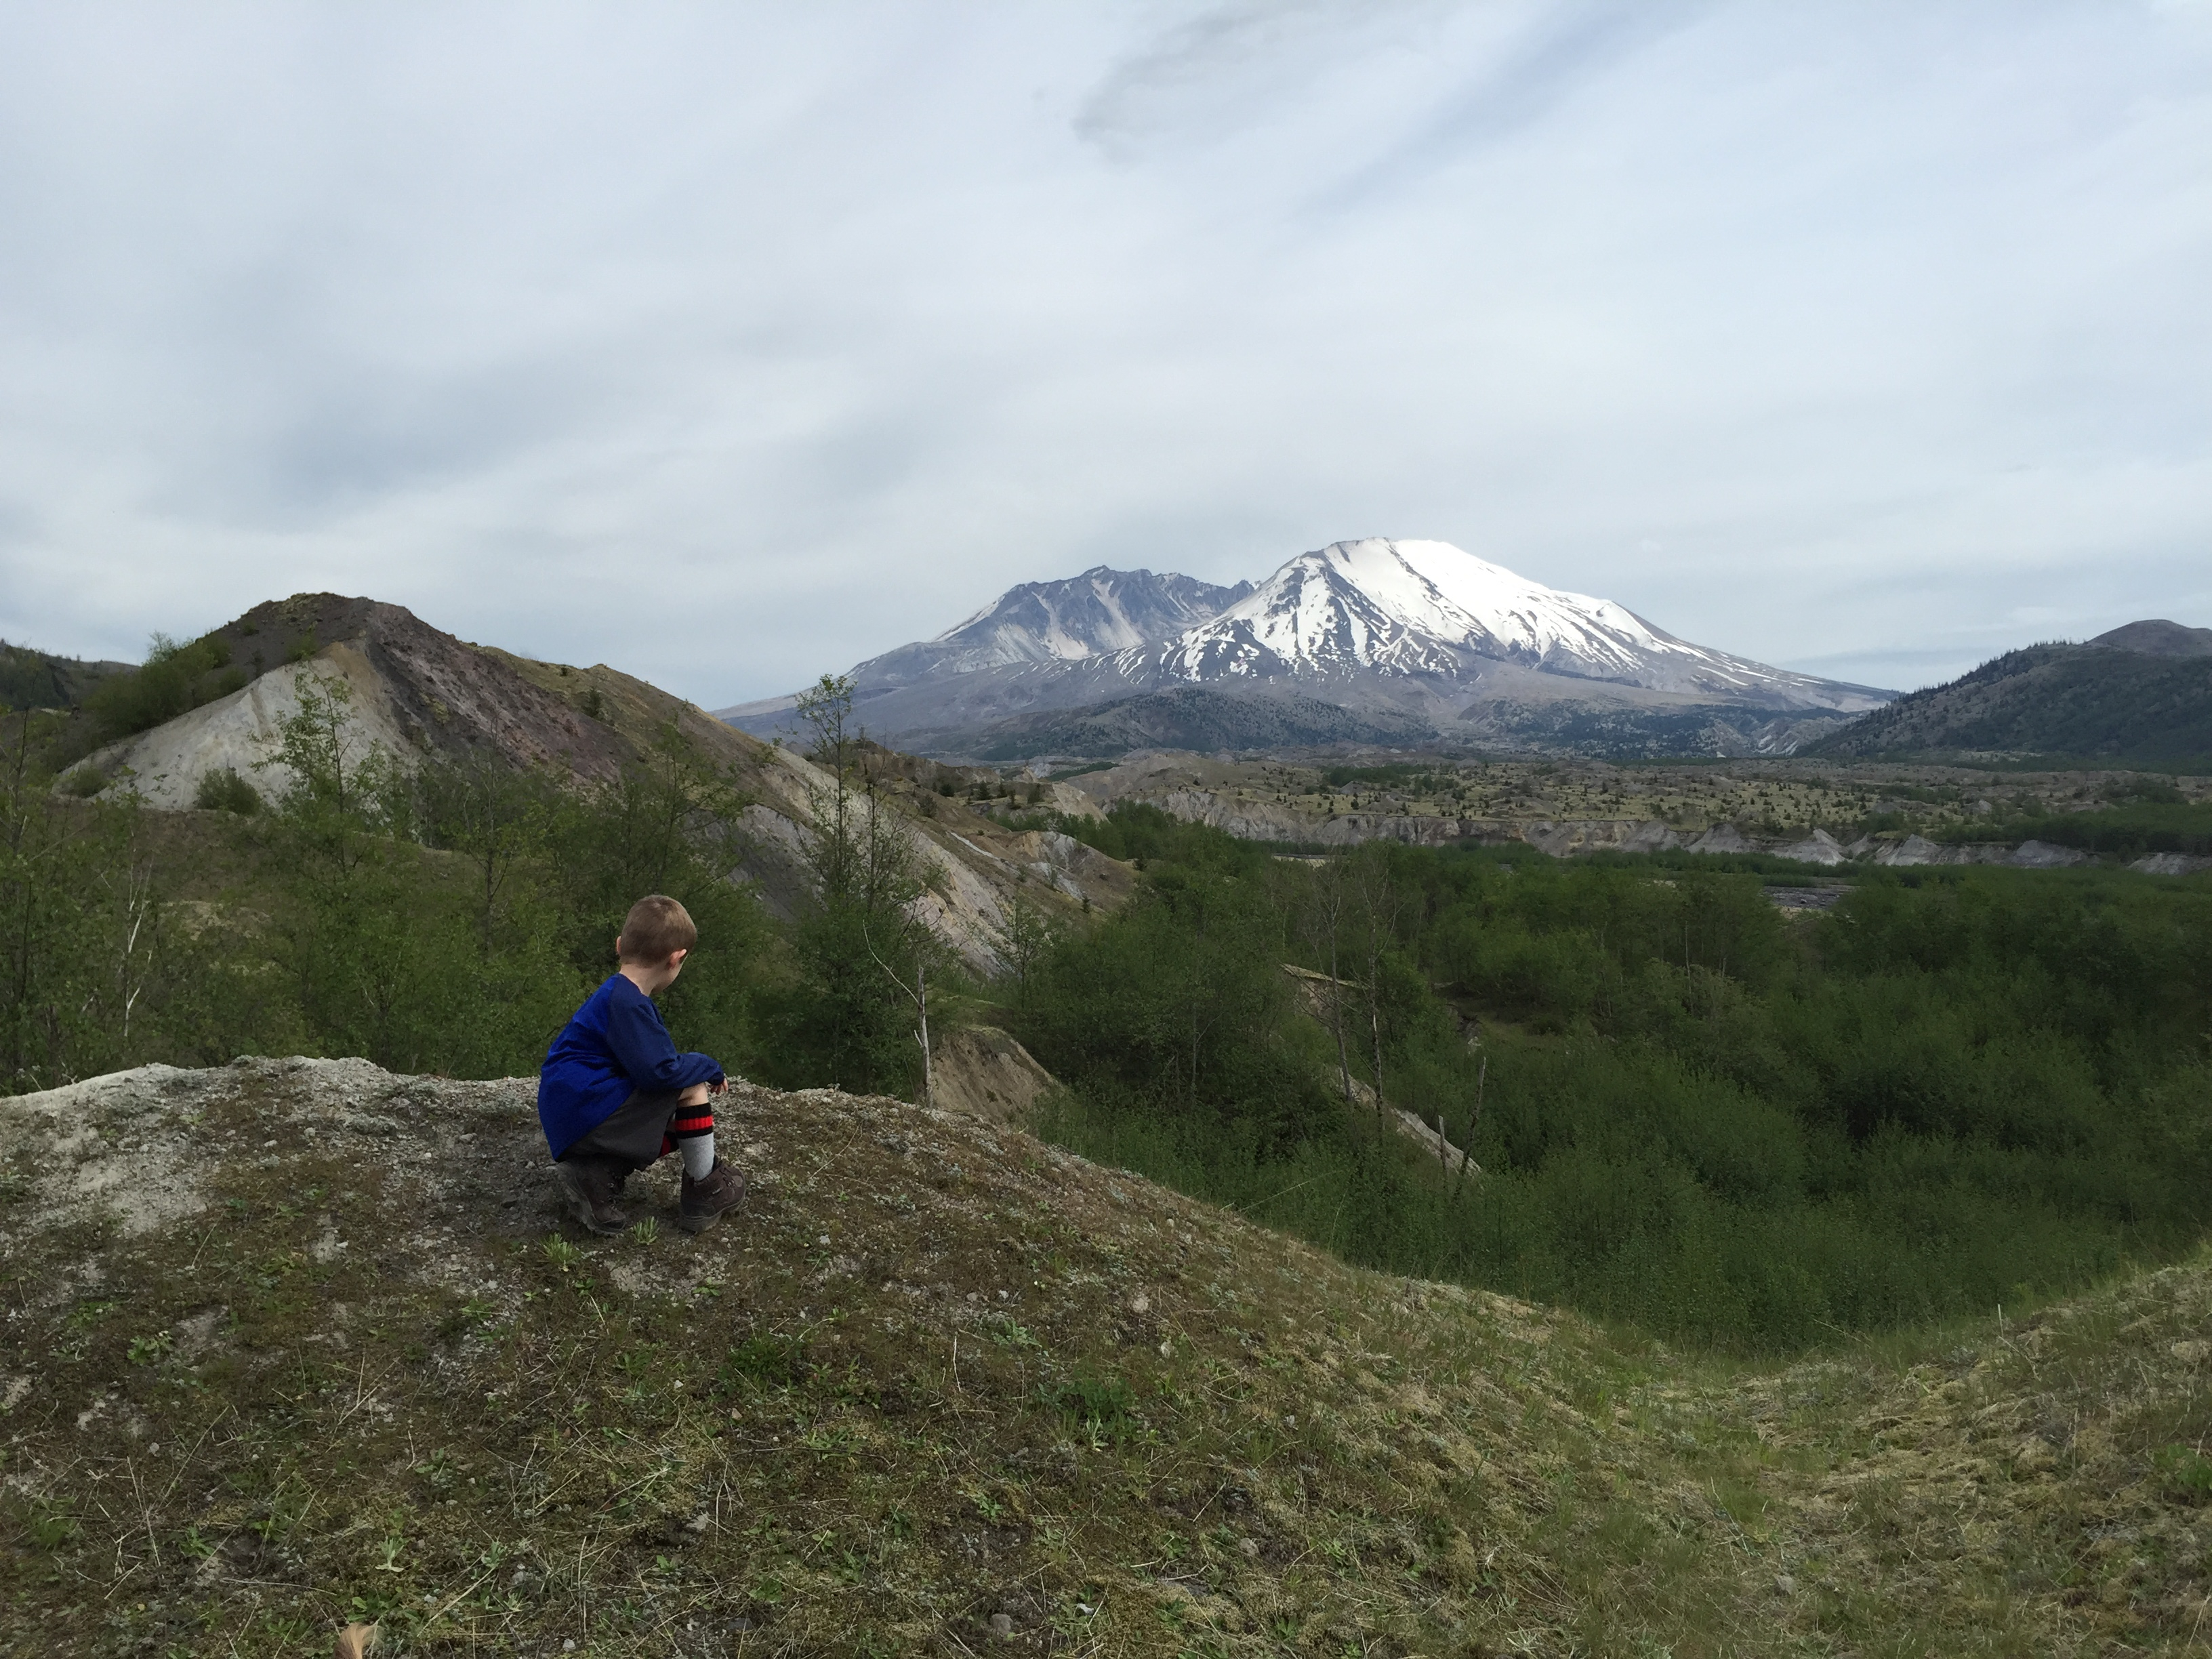 A great view of Mt. St. Helens from Hummocks Trail.